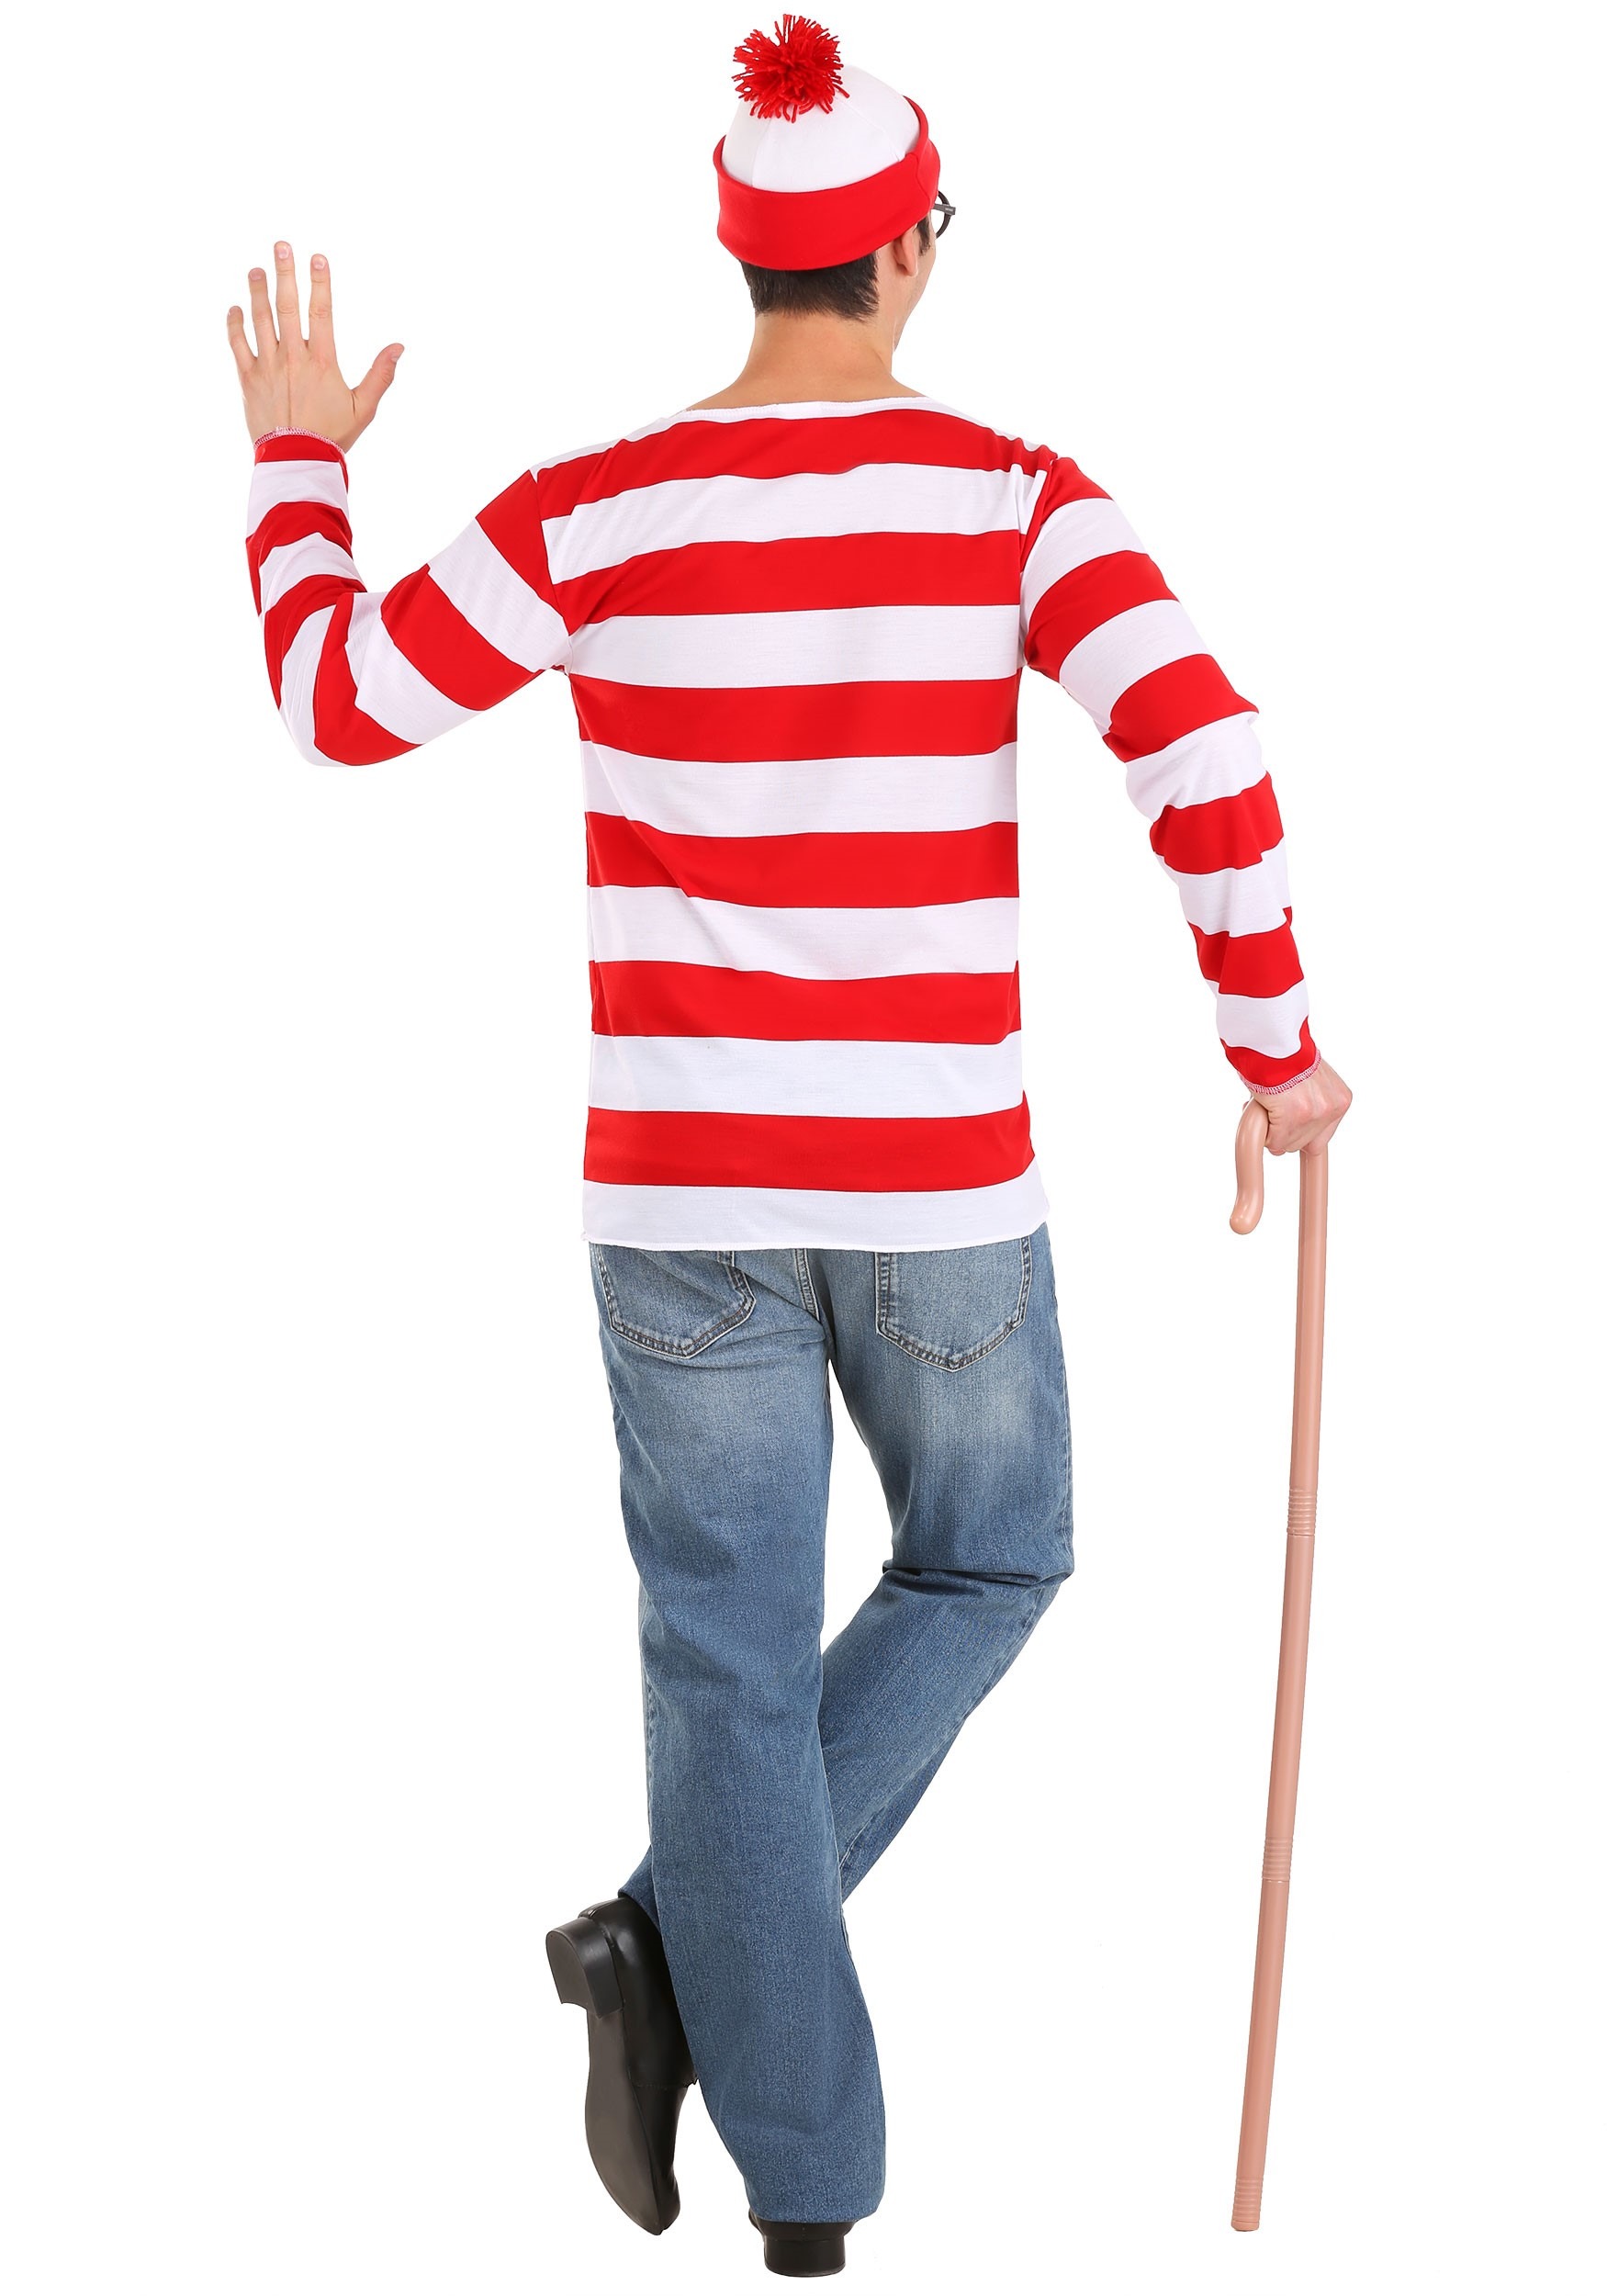 Where’s Waldo Costume | Exclusive Sizes Available